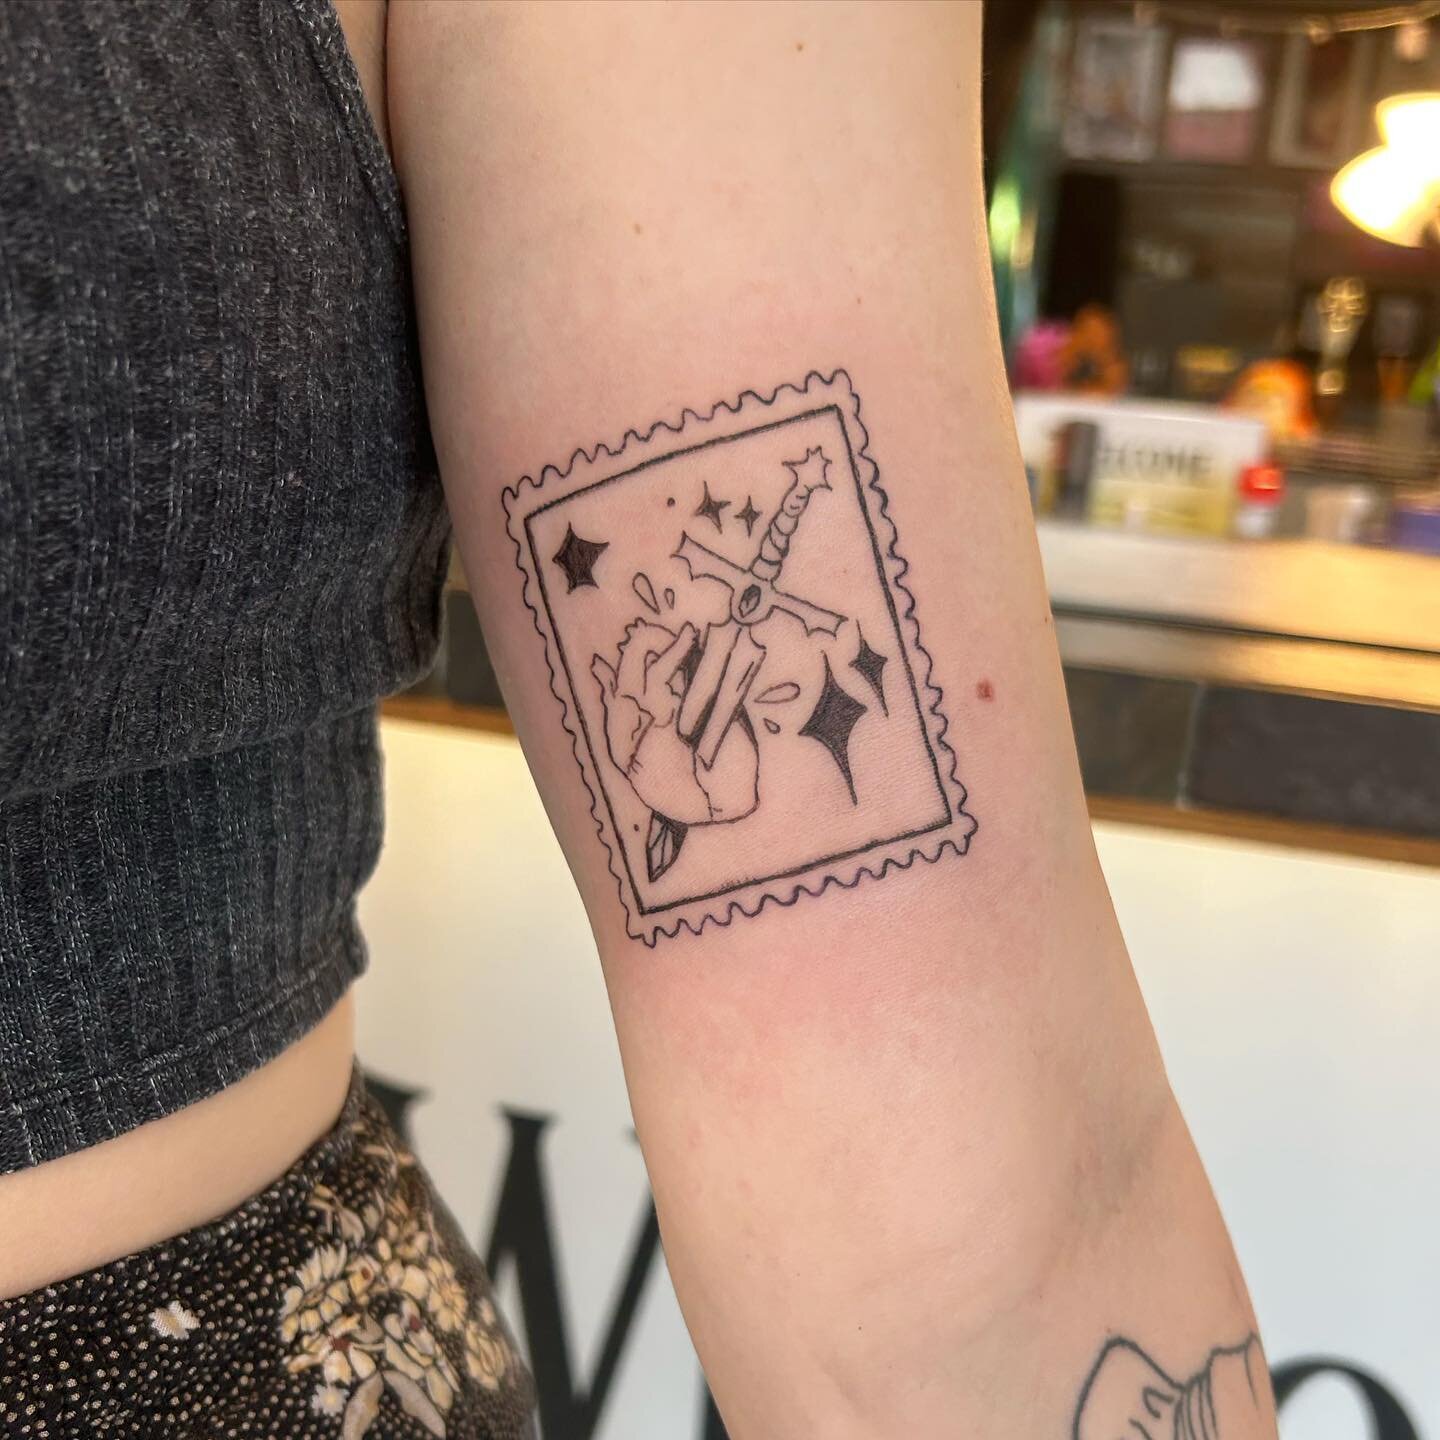 Stamp for Ash!! I was so psyched to do this design and it was so fun hanging with you, thank you!! :-]